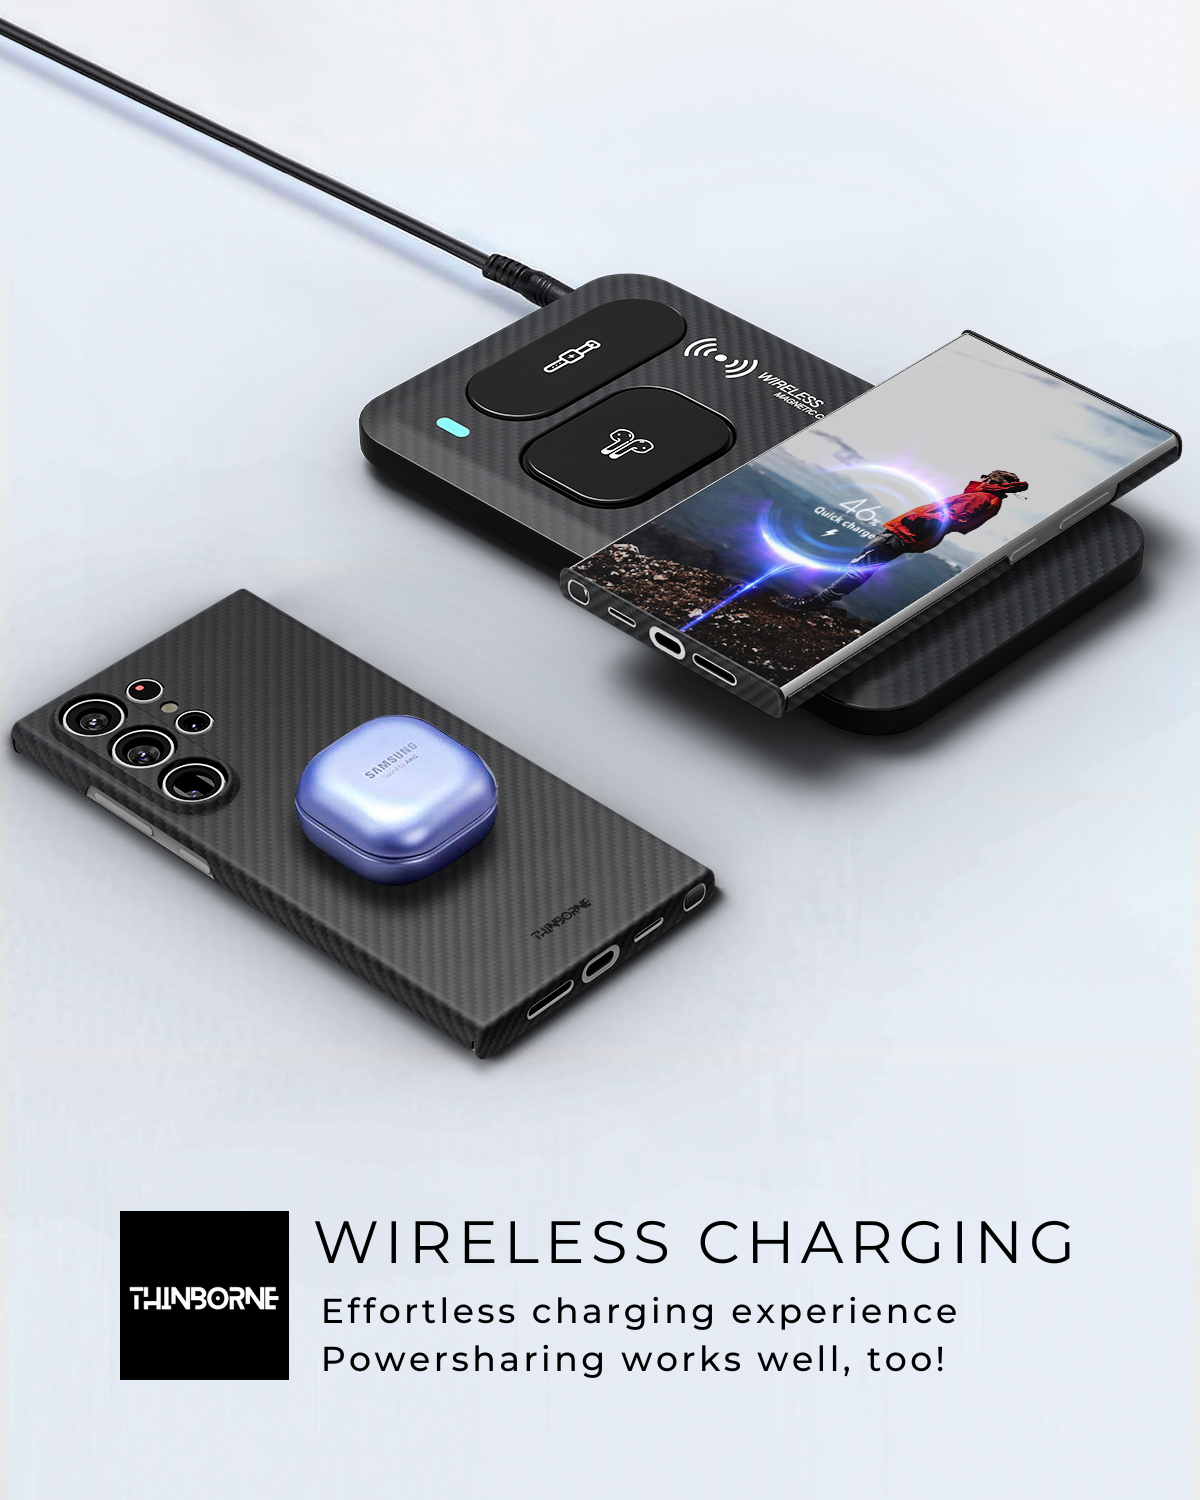 SHOWING THE GALAXY 24 ULTRA case IS COMPATIBLE WITH WIRELESS CHARGING AND POWERSHARING